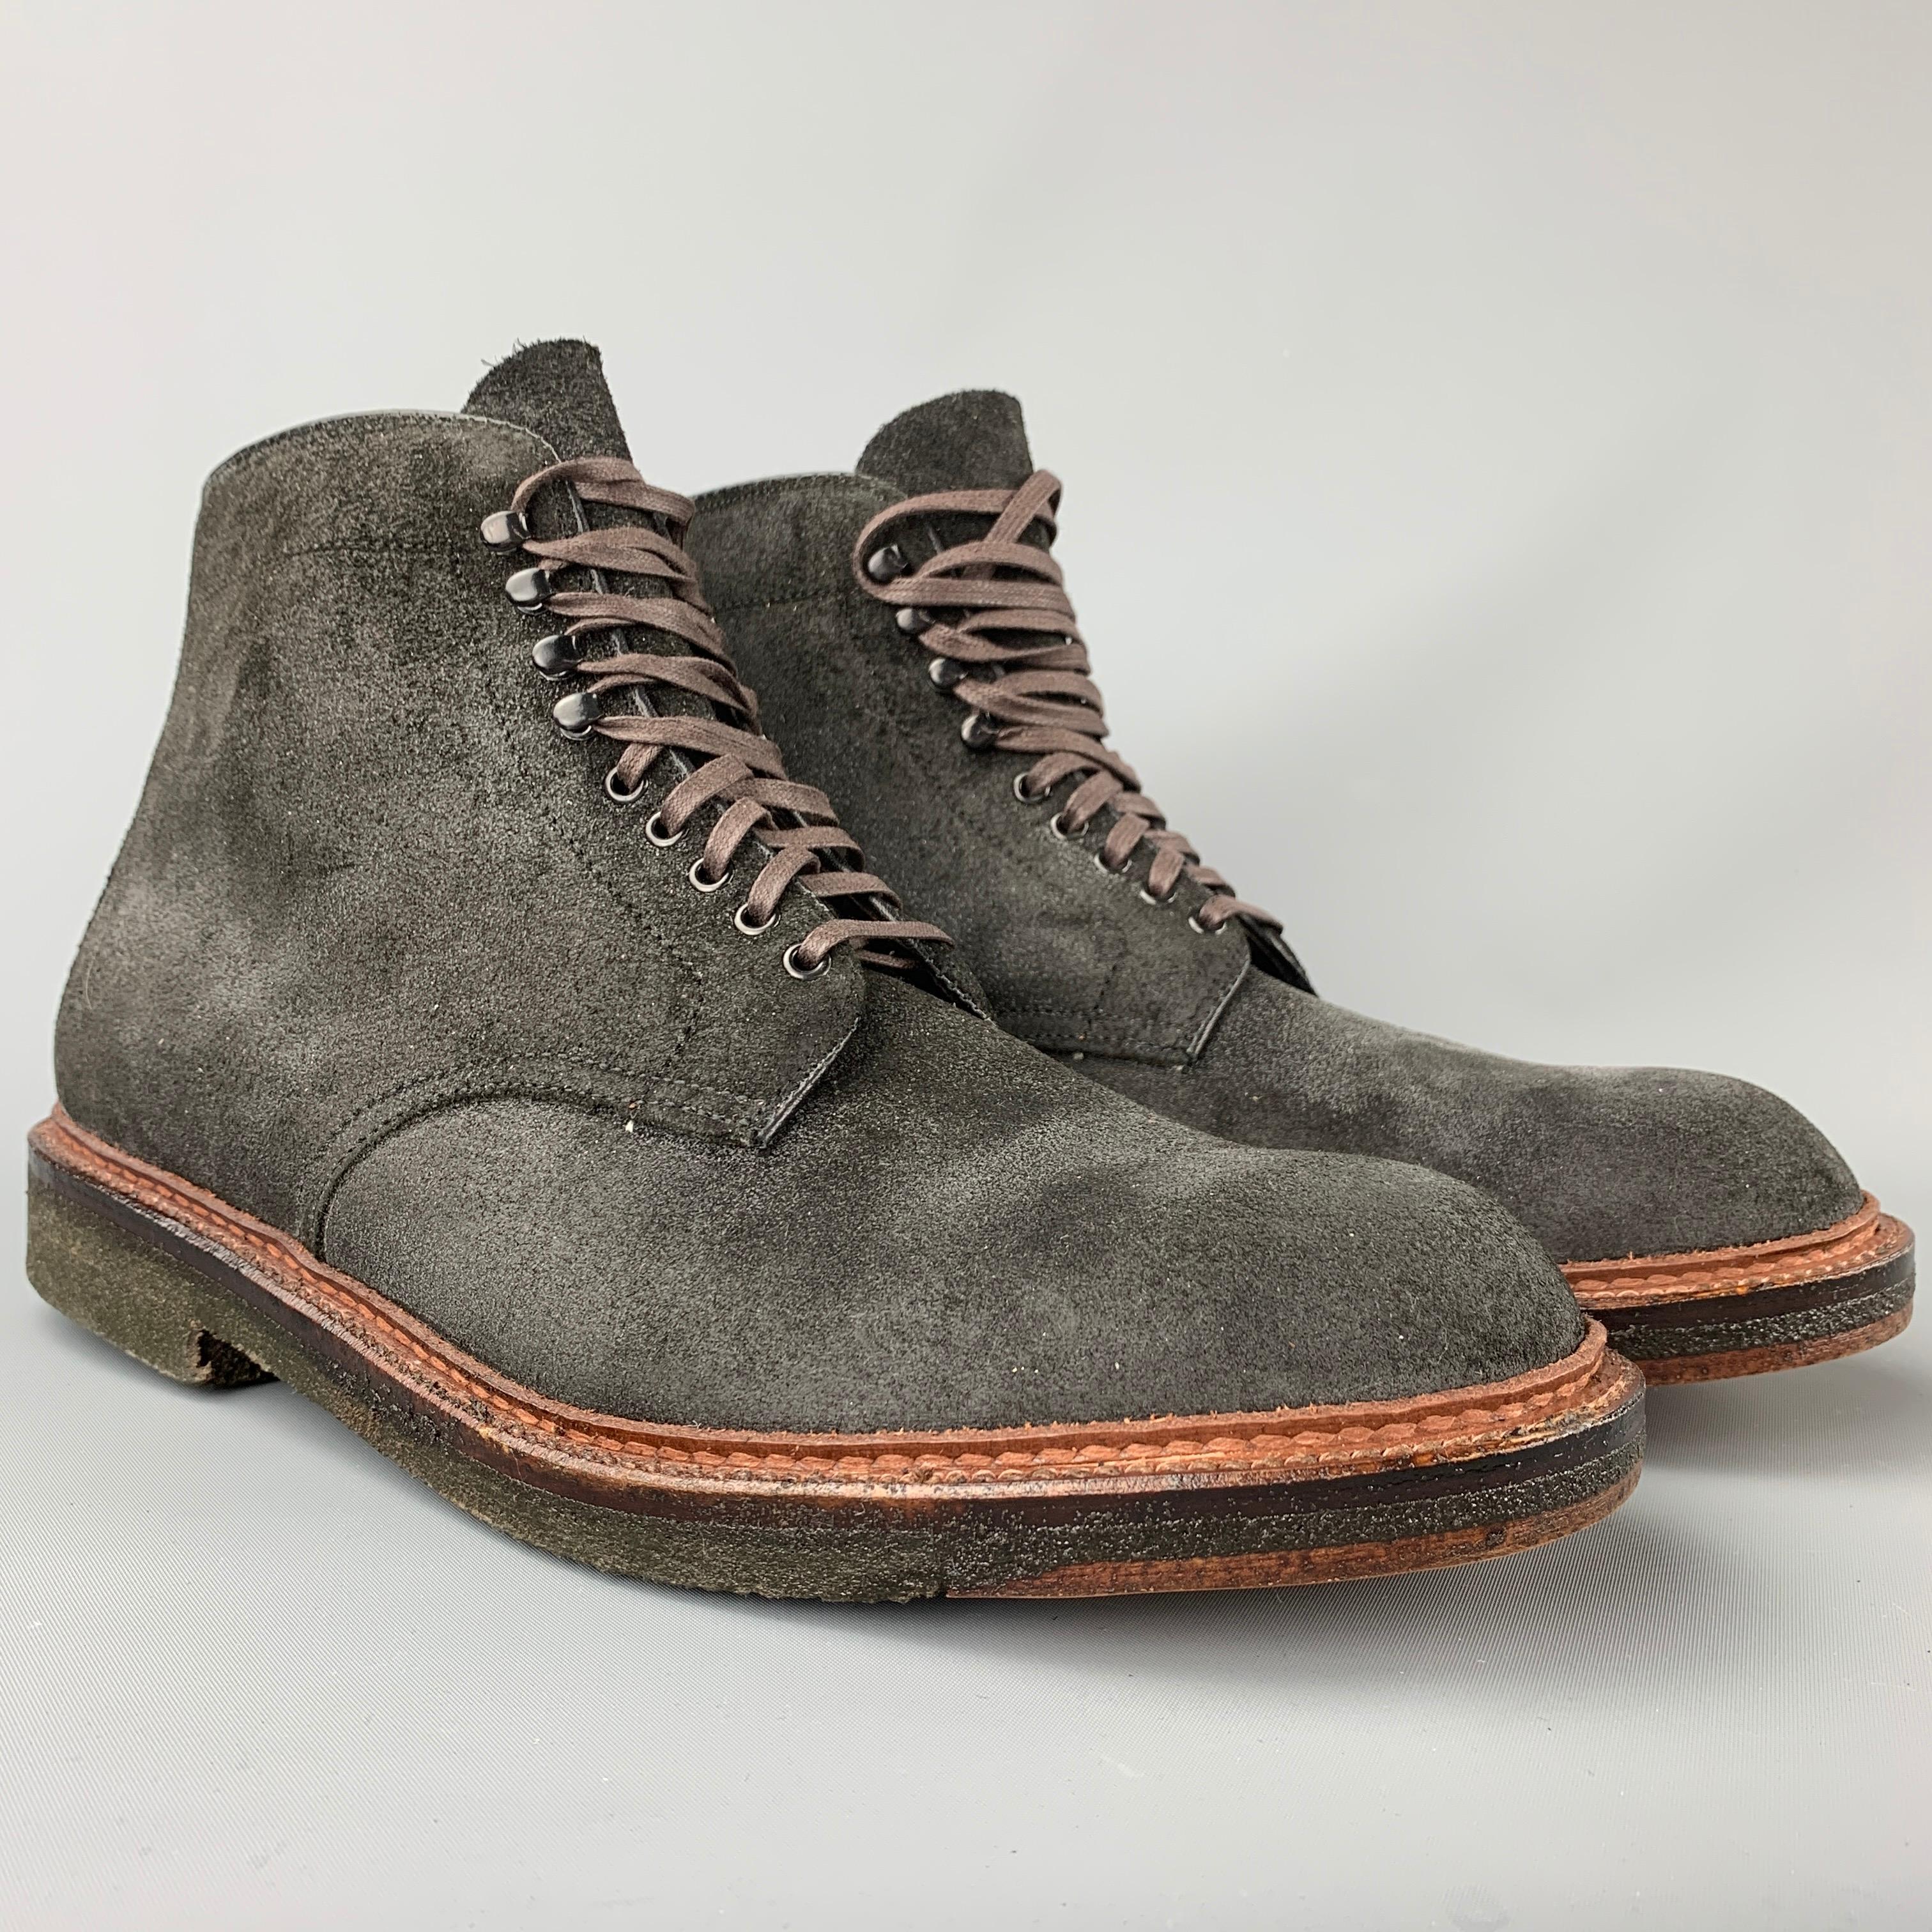 ALDEN boots comes in a black textured horween earth chamois leather featuring a ankle style, plantation crepe sole, leather toe patch, triple-ridged steel shank, and a lace up closure. Made in USA.

New With Box. 
Marked: 10